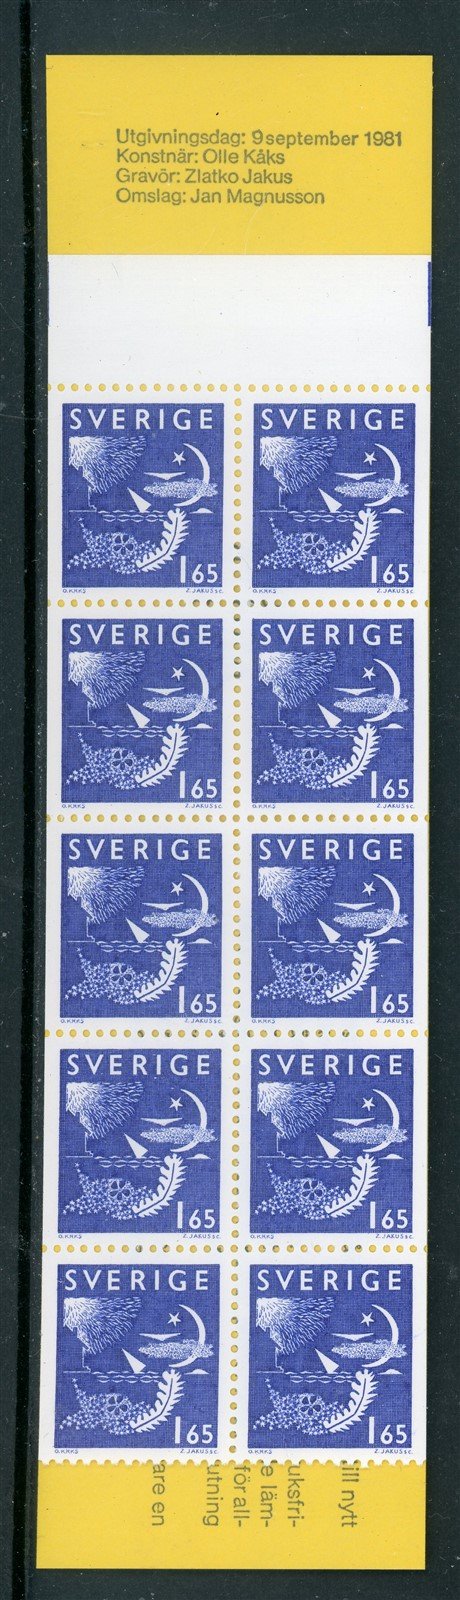 Sweden Scott #1376a MNH BOOKLET Day and Night CV$10+ 417386